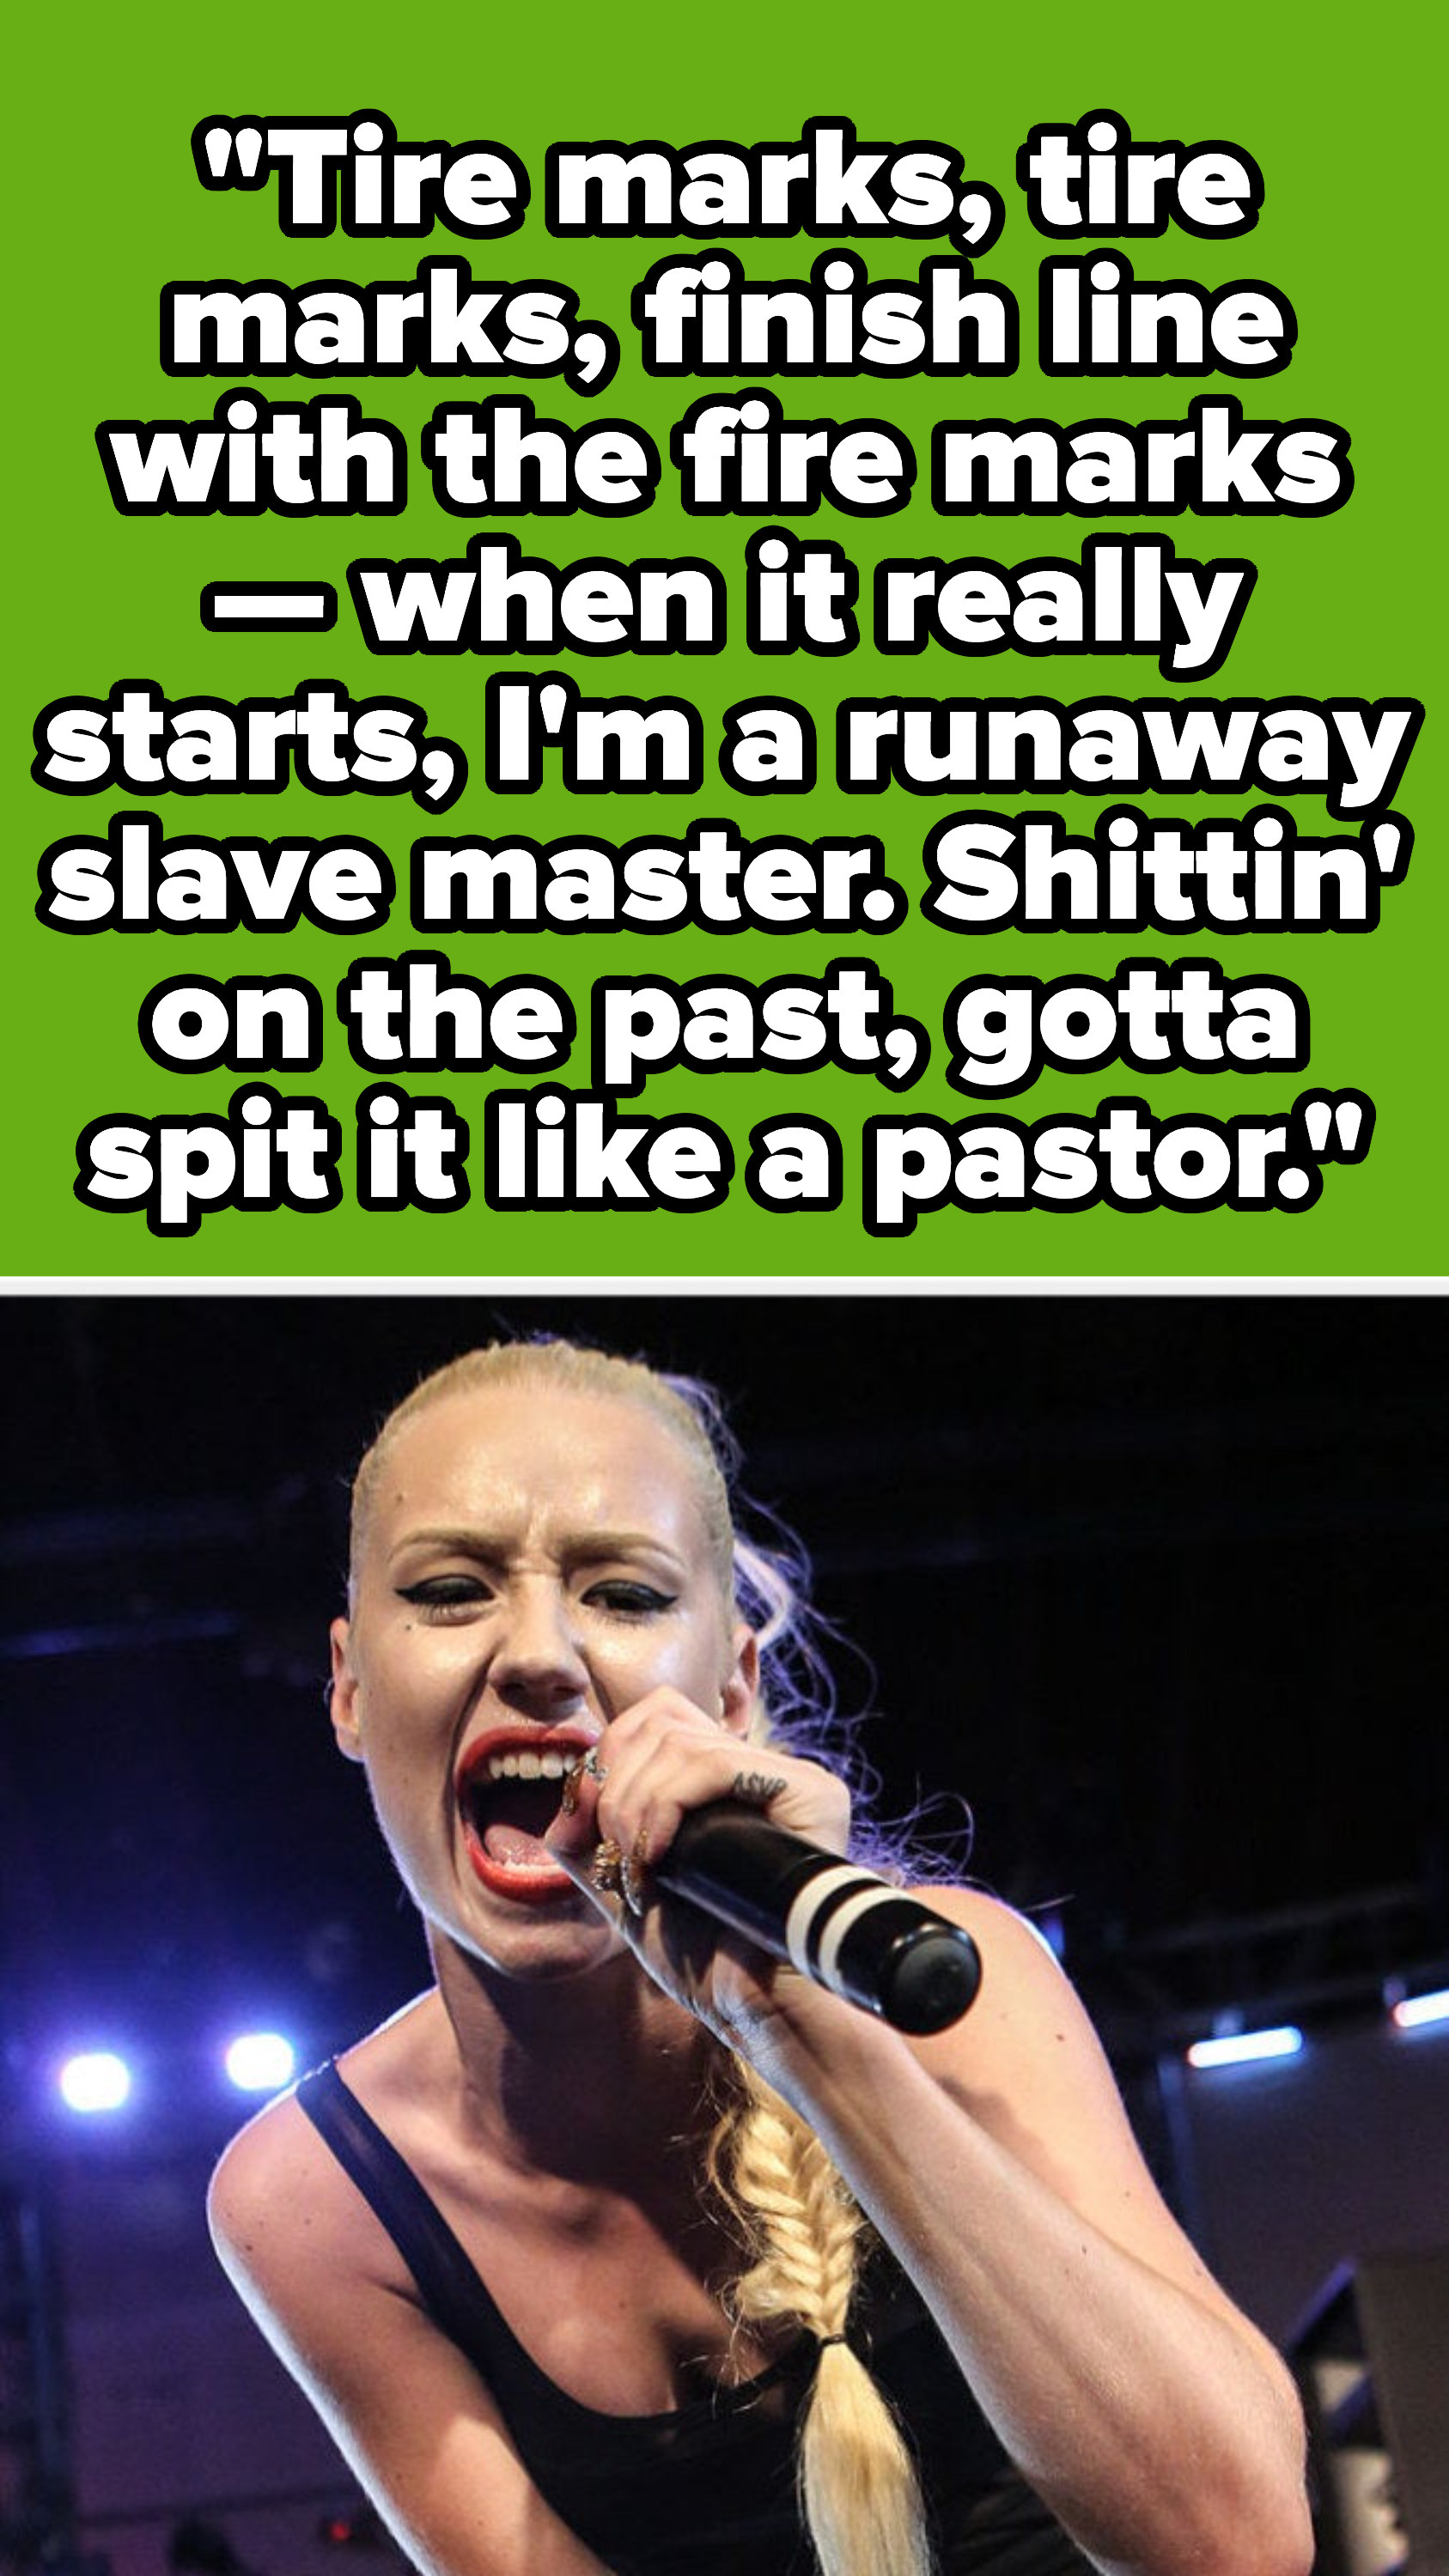 Iggy Azalea lyrics: &quot;Tire marks, tire marks, finish line with the fire marks — when it really starts, I’m a runaway slave master. Shittin’ on the past, gotta spit it like a pastor&quot;